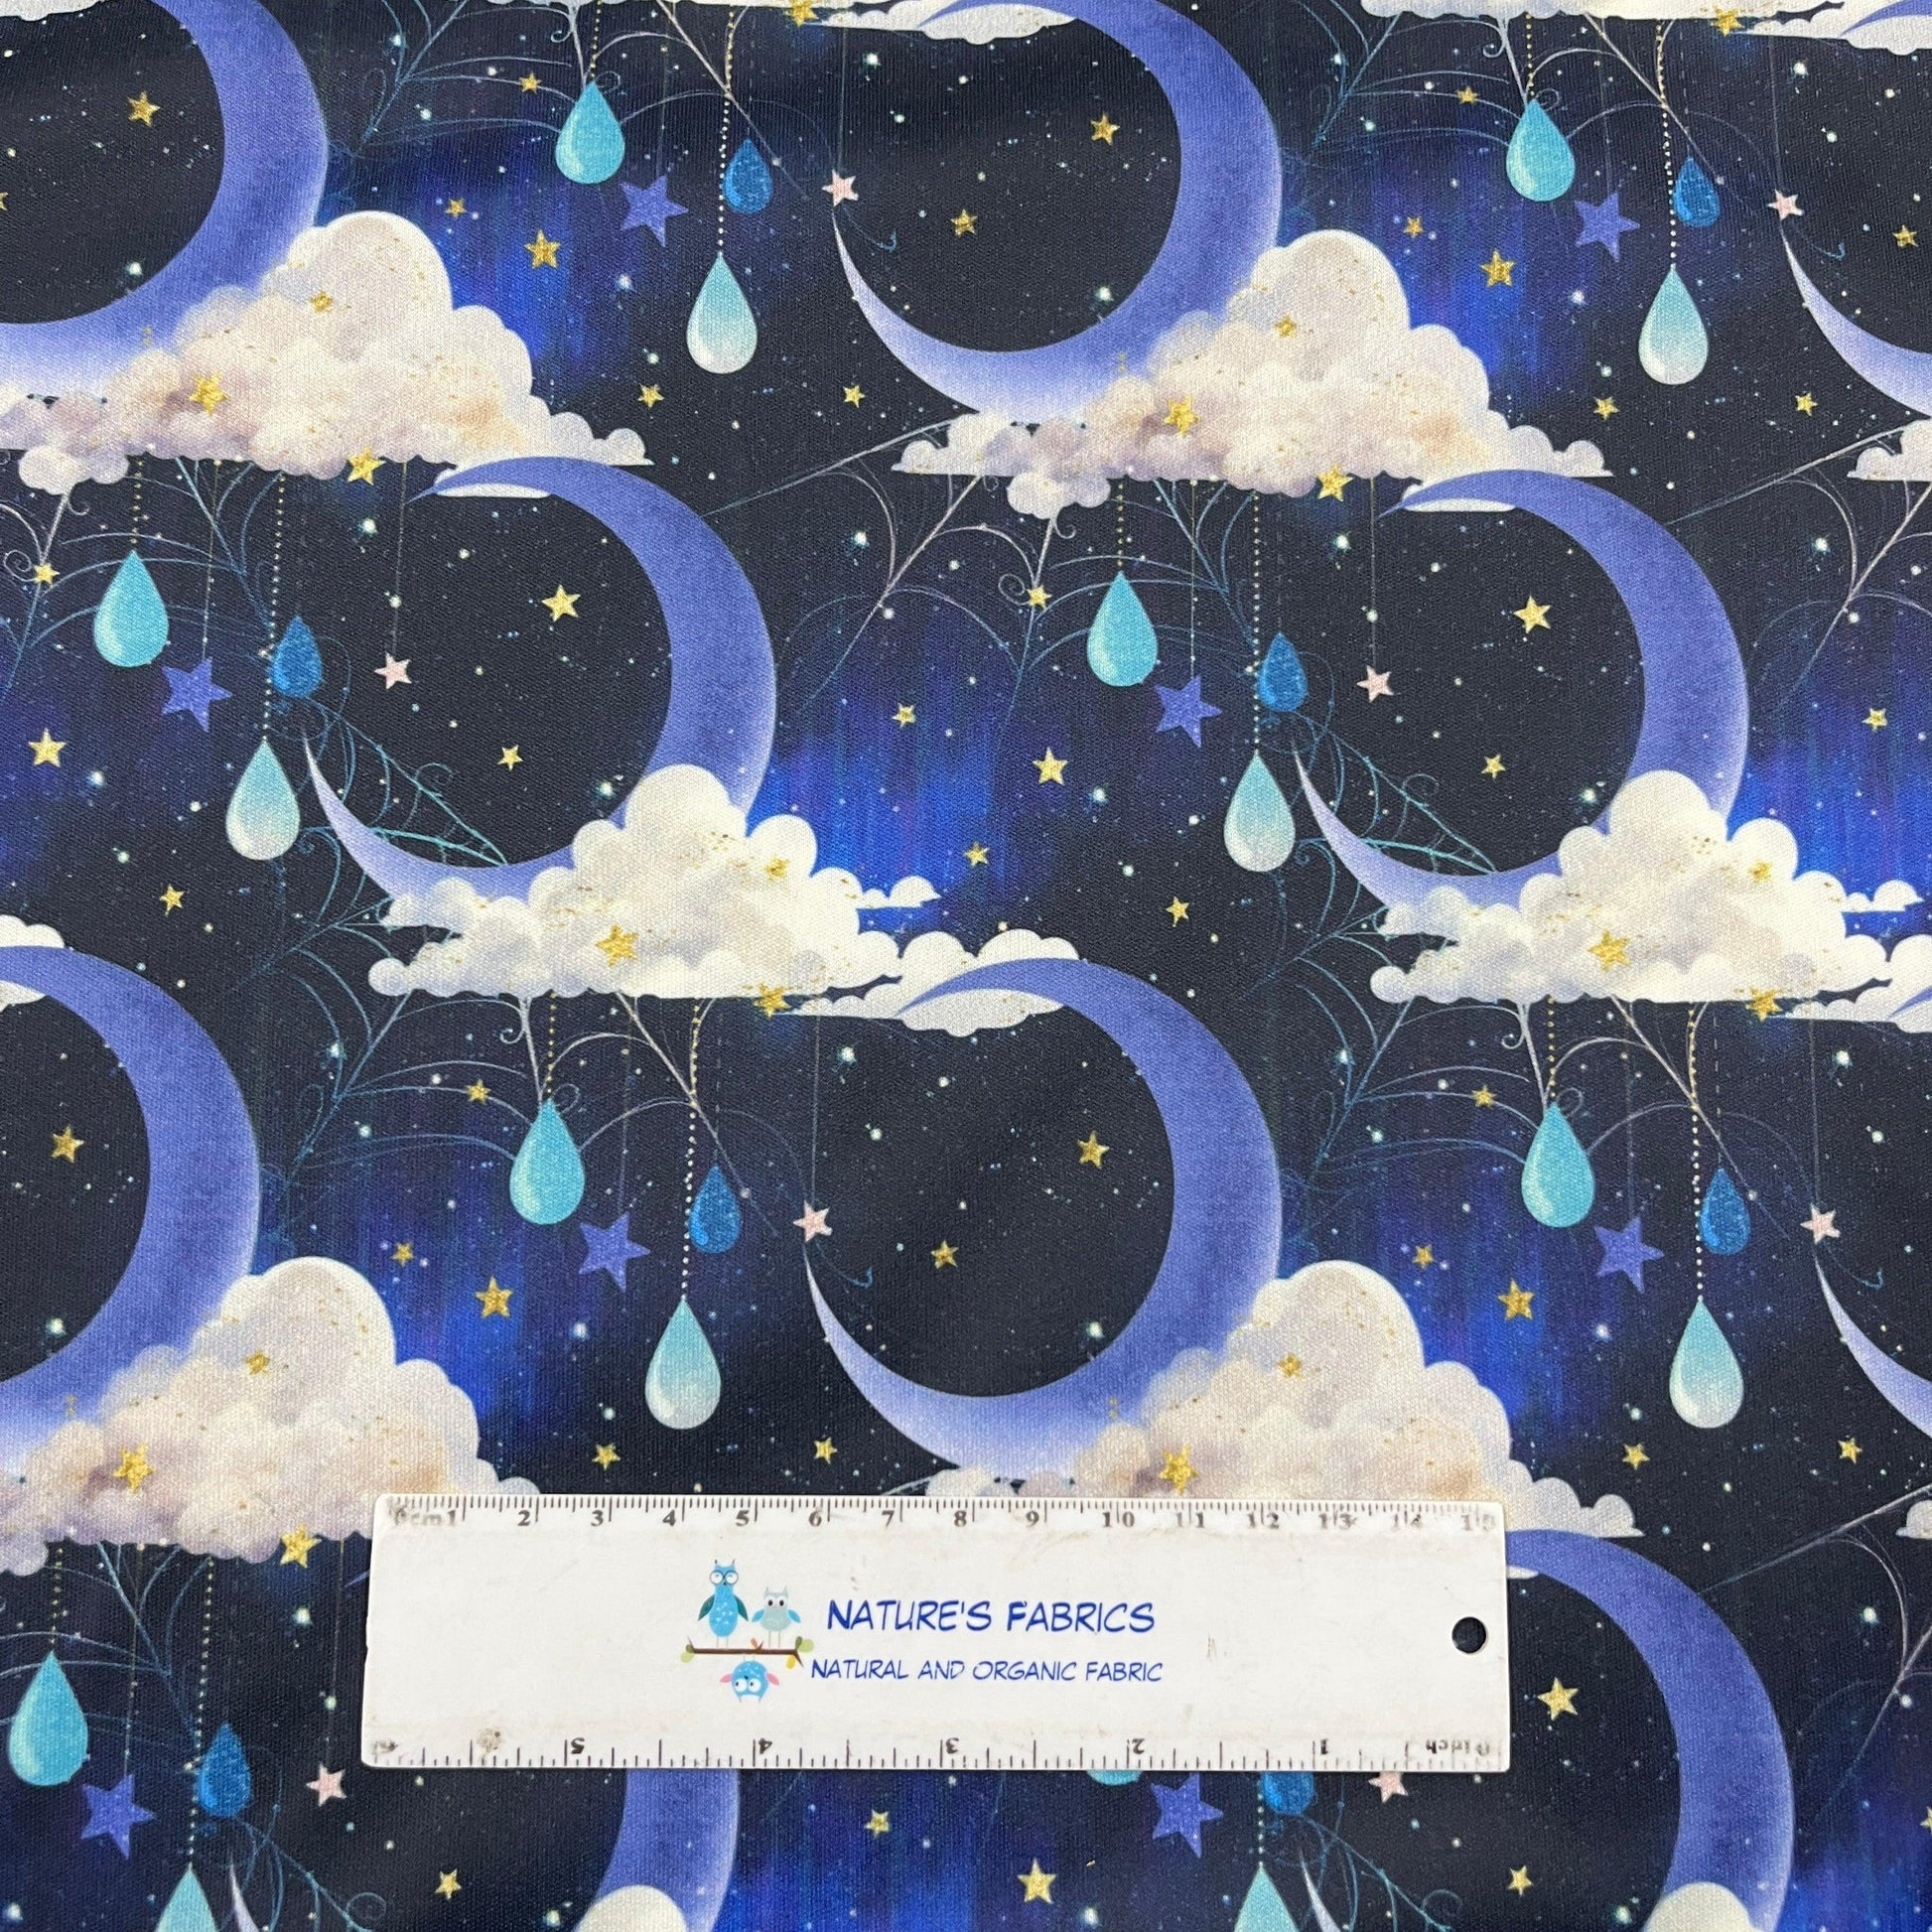 Celestial Charms 1 mil PUL Fabric - Made in the USA - Nature's Fabrics